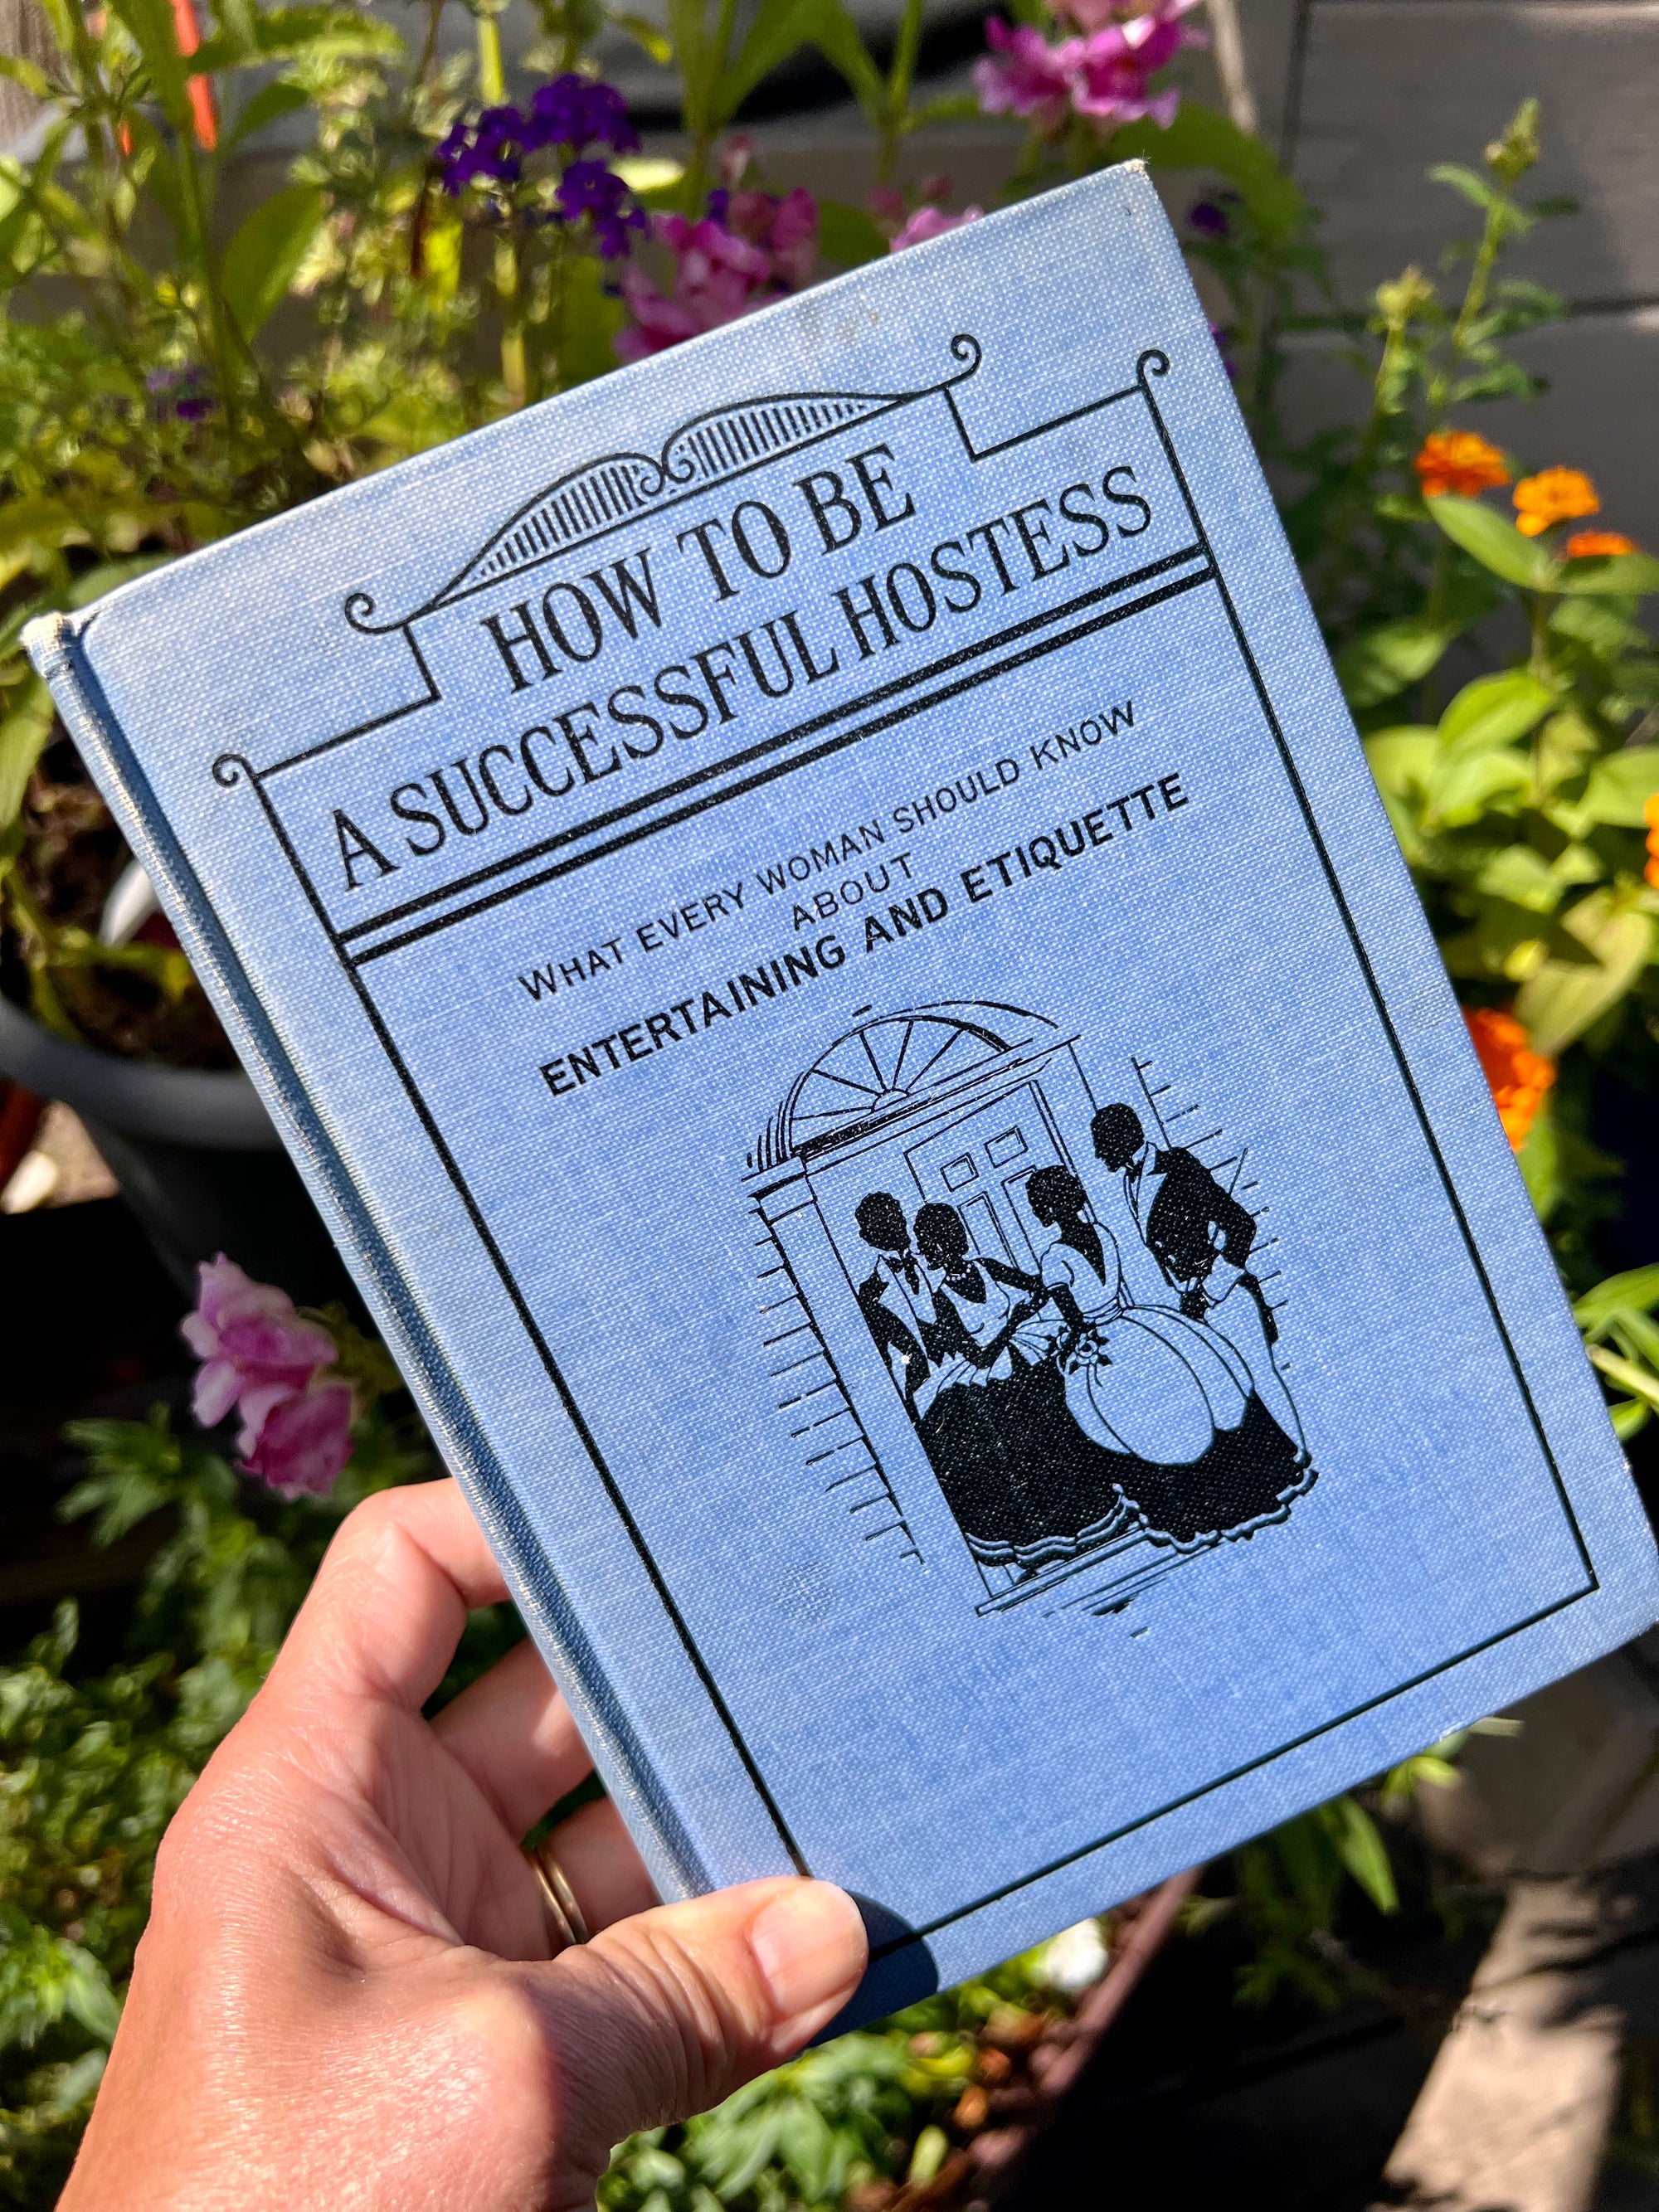 How to Be a Successful Hostess What Every Woman Should Know about Entertaining and Etiquette by Charlotte Clarke 1930 Kenmor Company